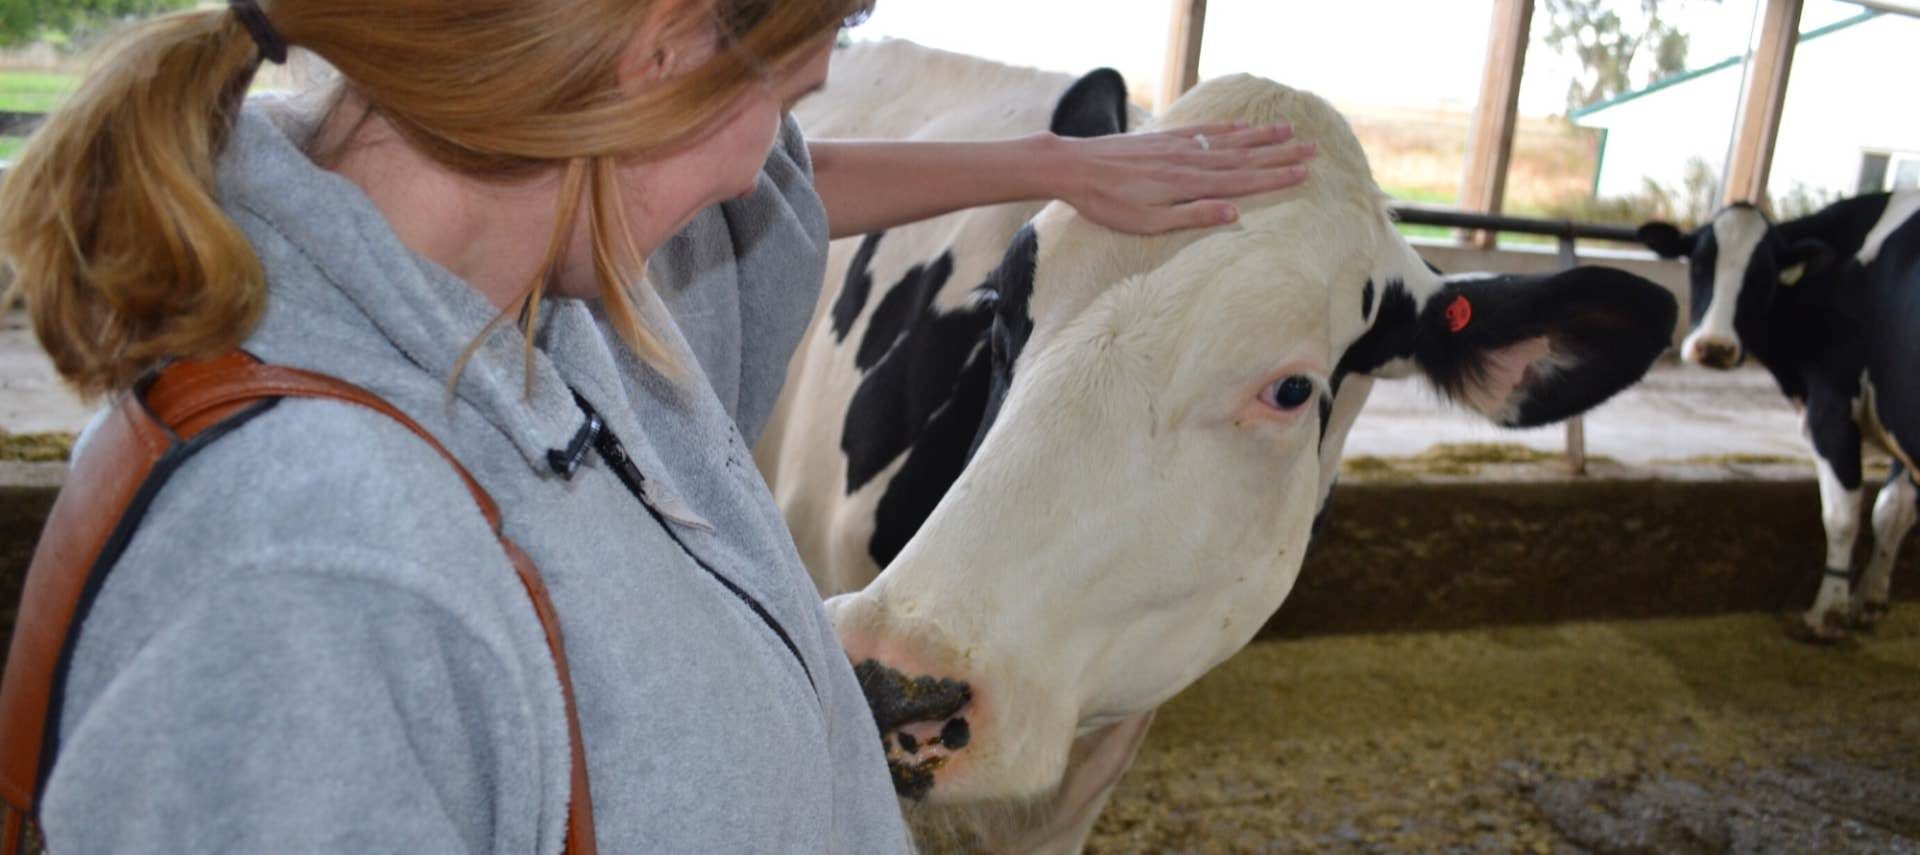 Close up view of a woman in a gray sweatshirt petting a black and white dairy cow